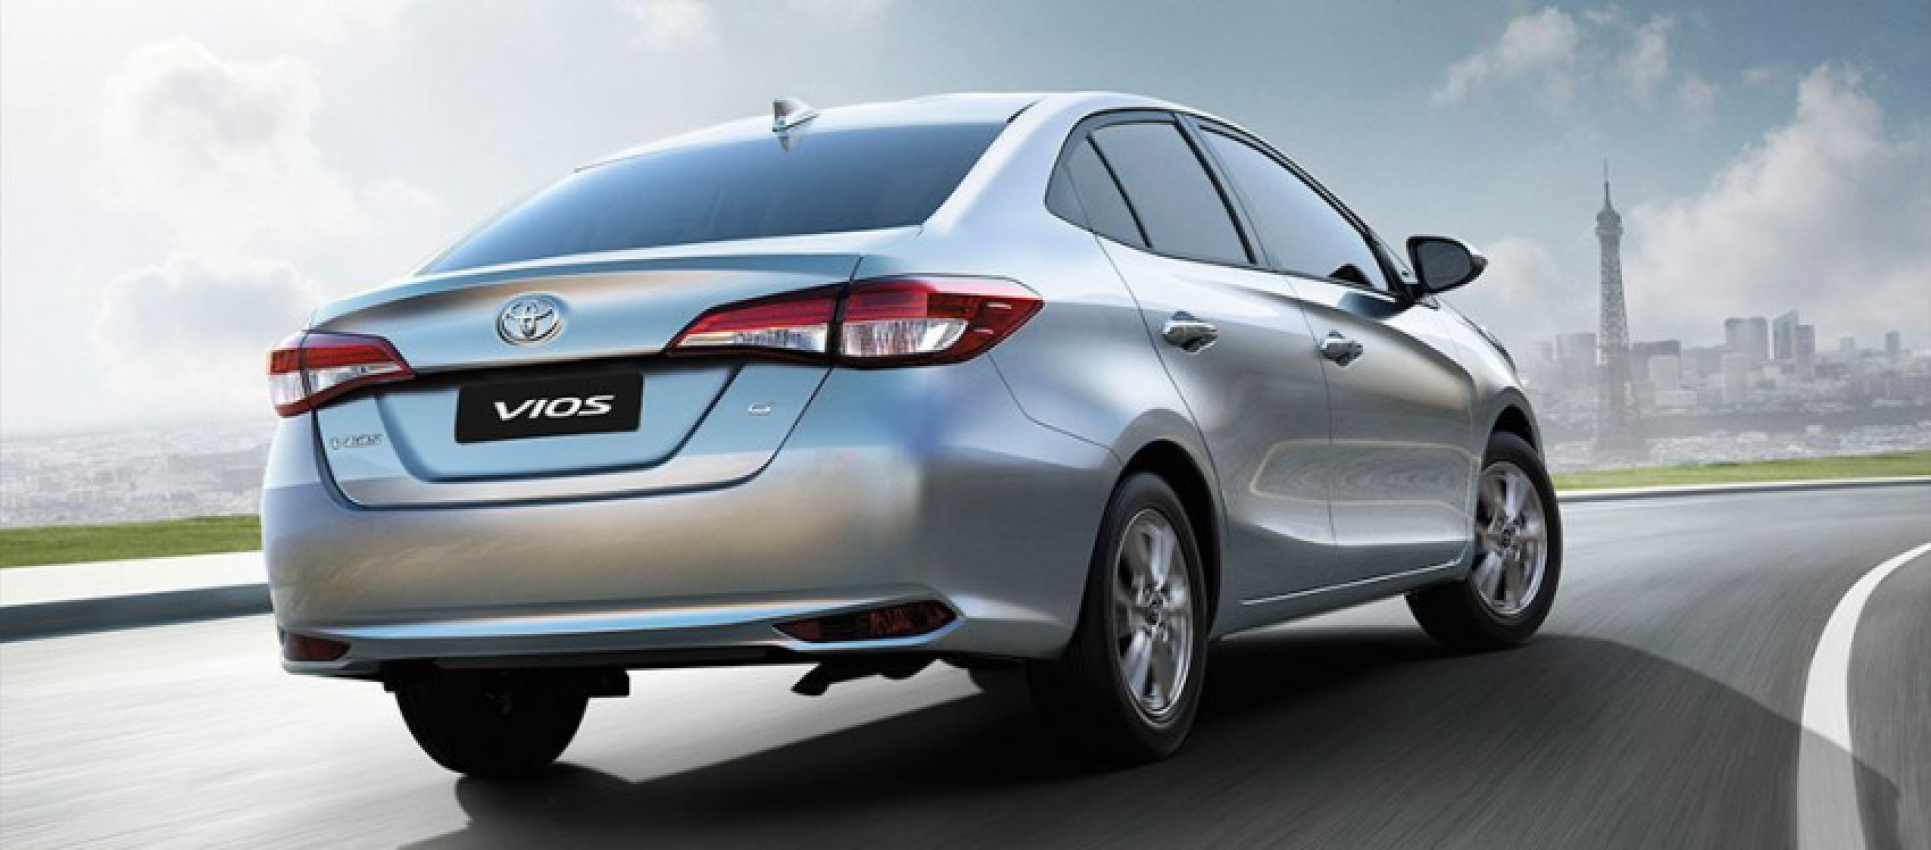 autos, cars, toyota, auto news, toyota vios, vios, all-new toyota vios launched in laos and cambodia, fully-imported from thailand